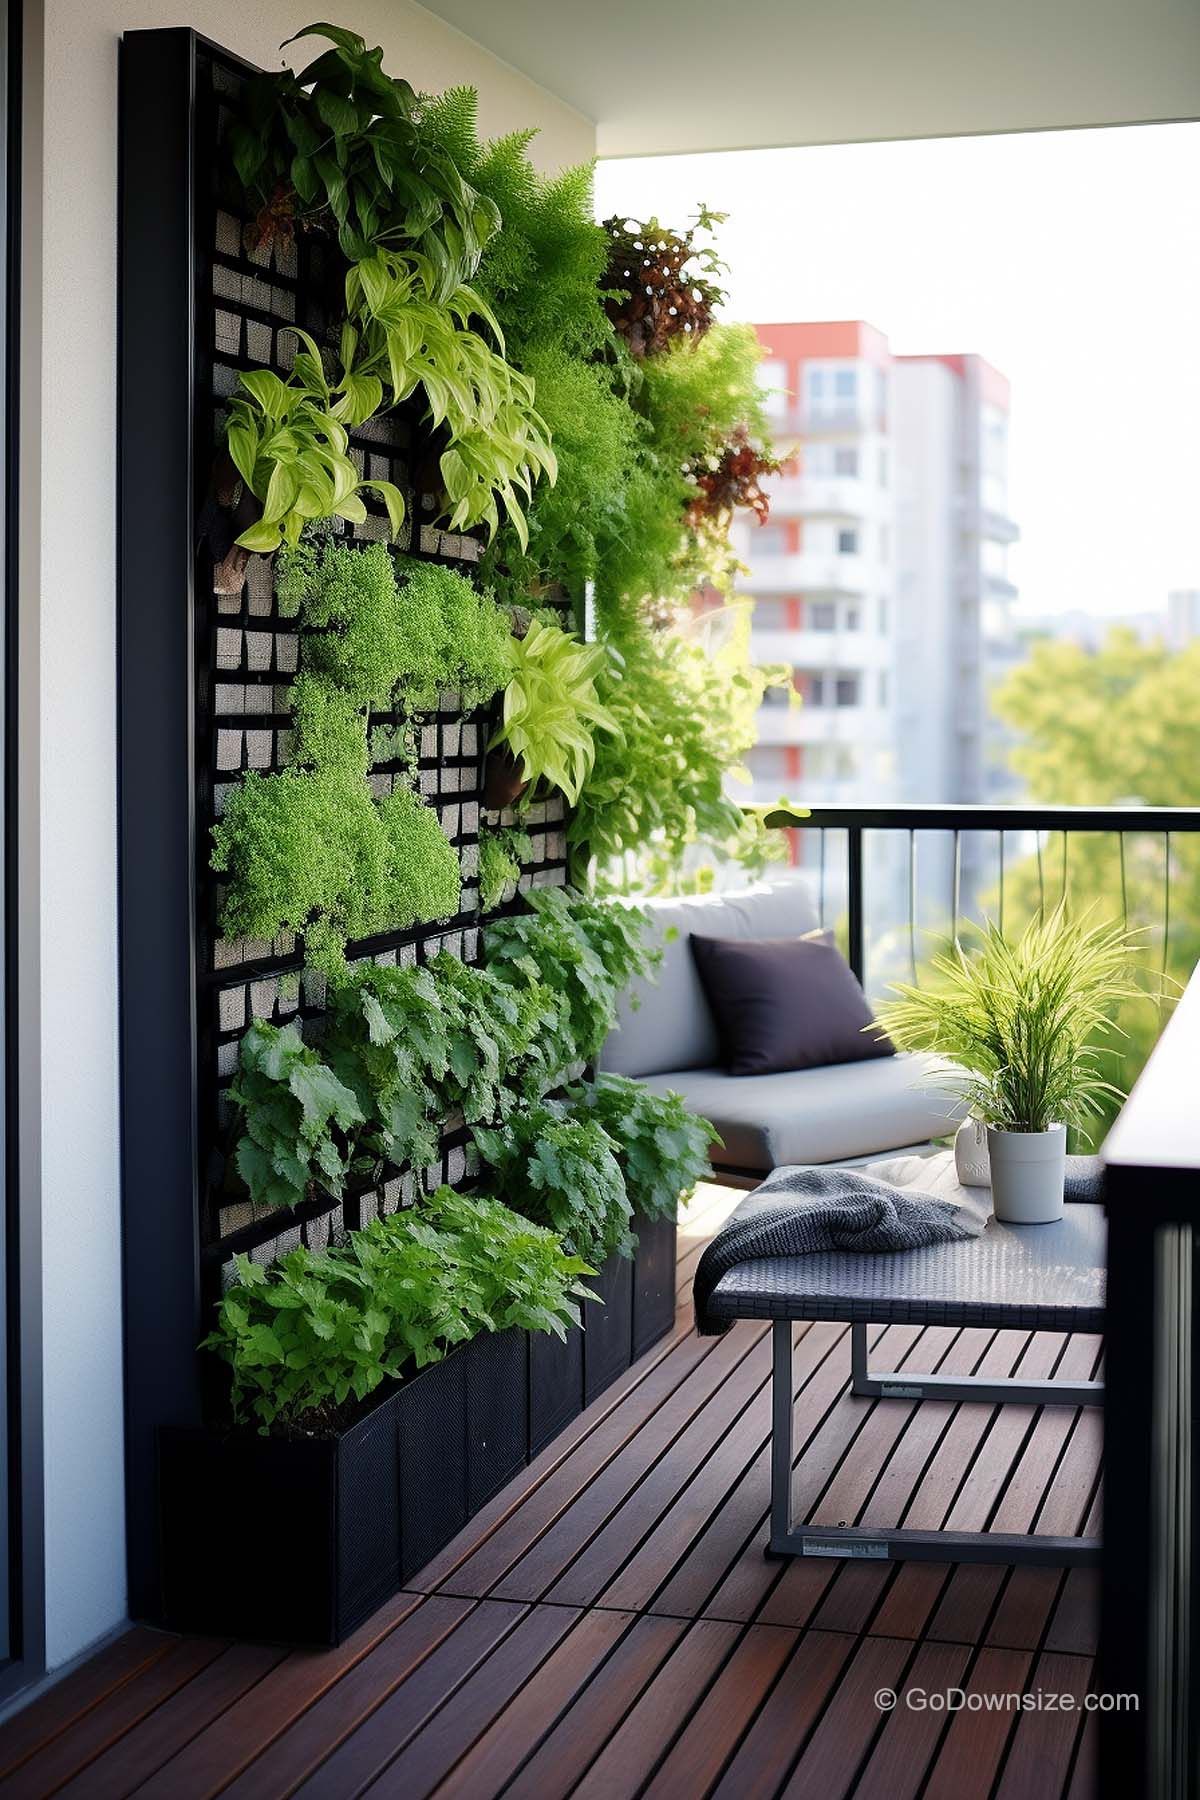 Growing Up: The Innovative Trend of Vertical Gardens